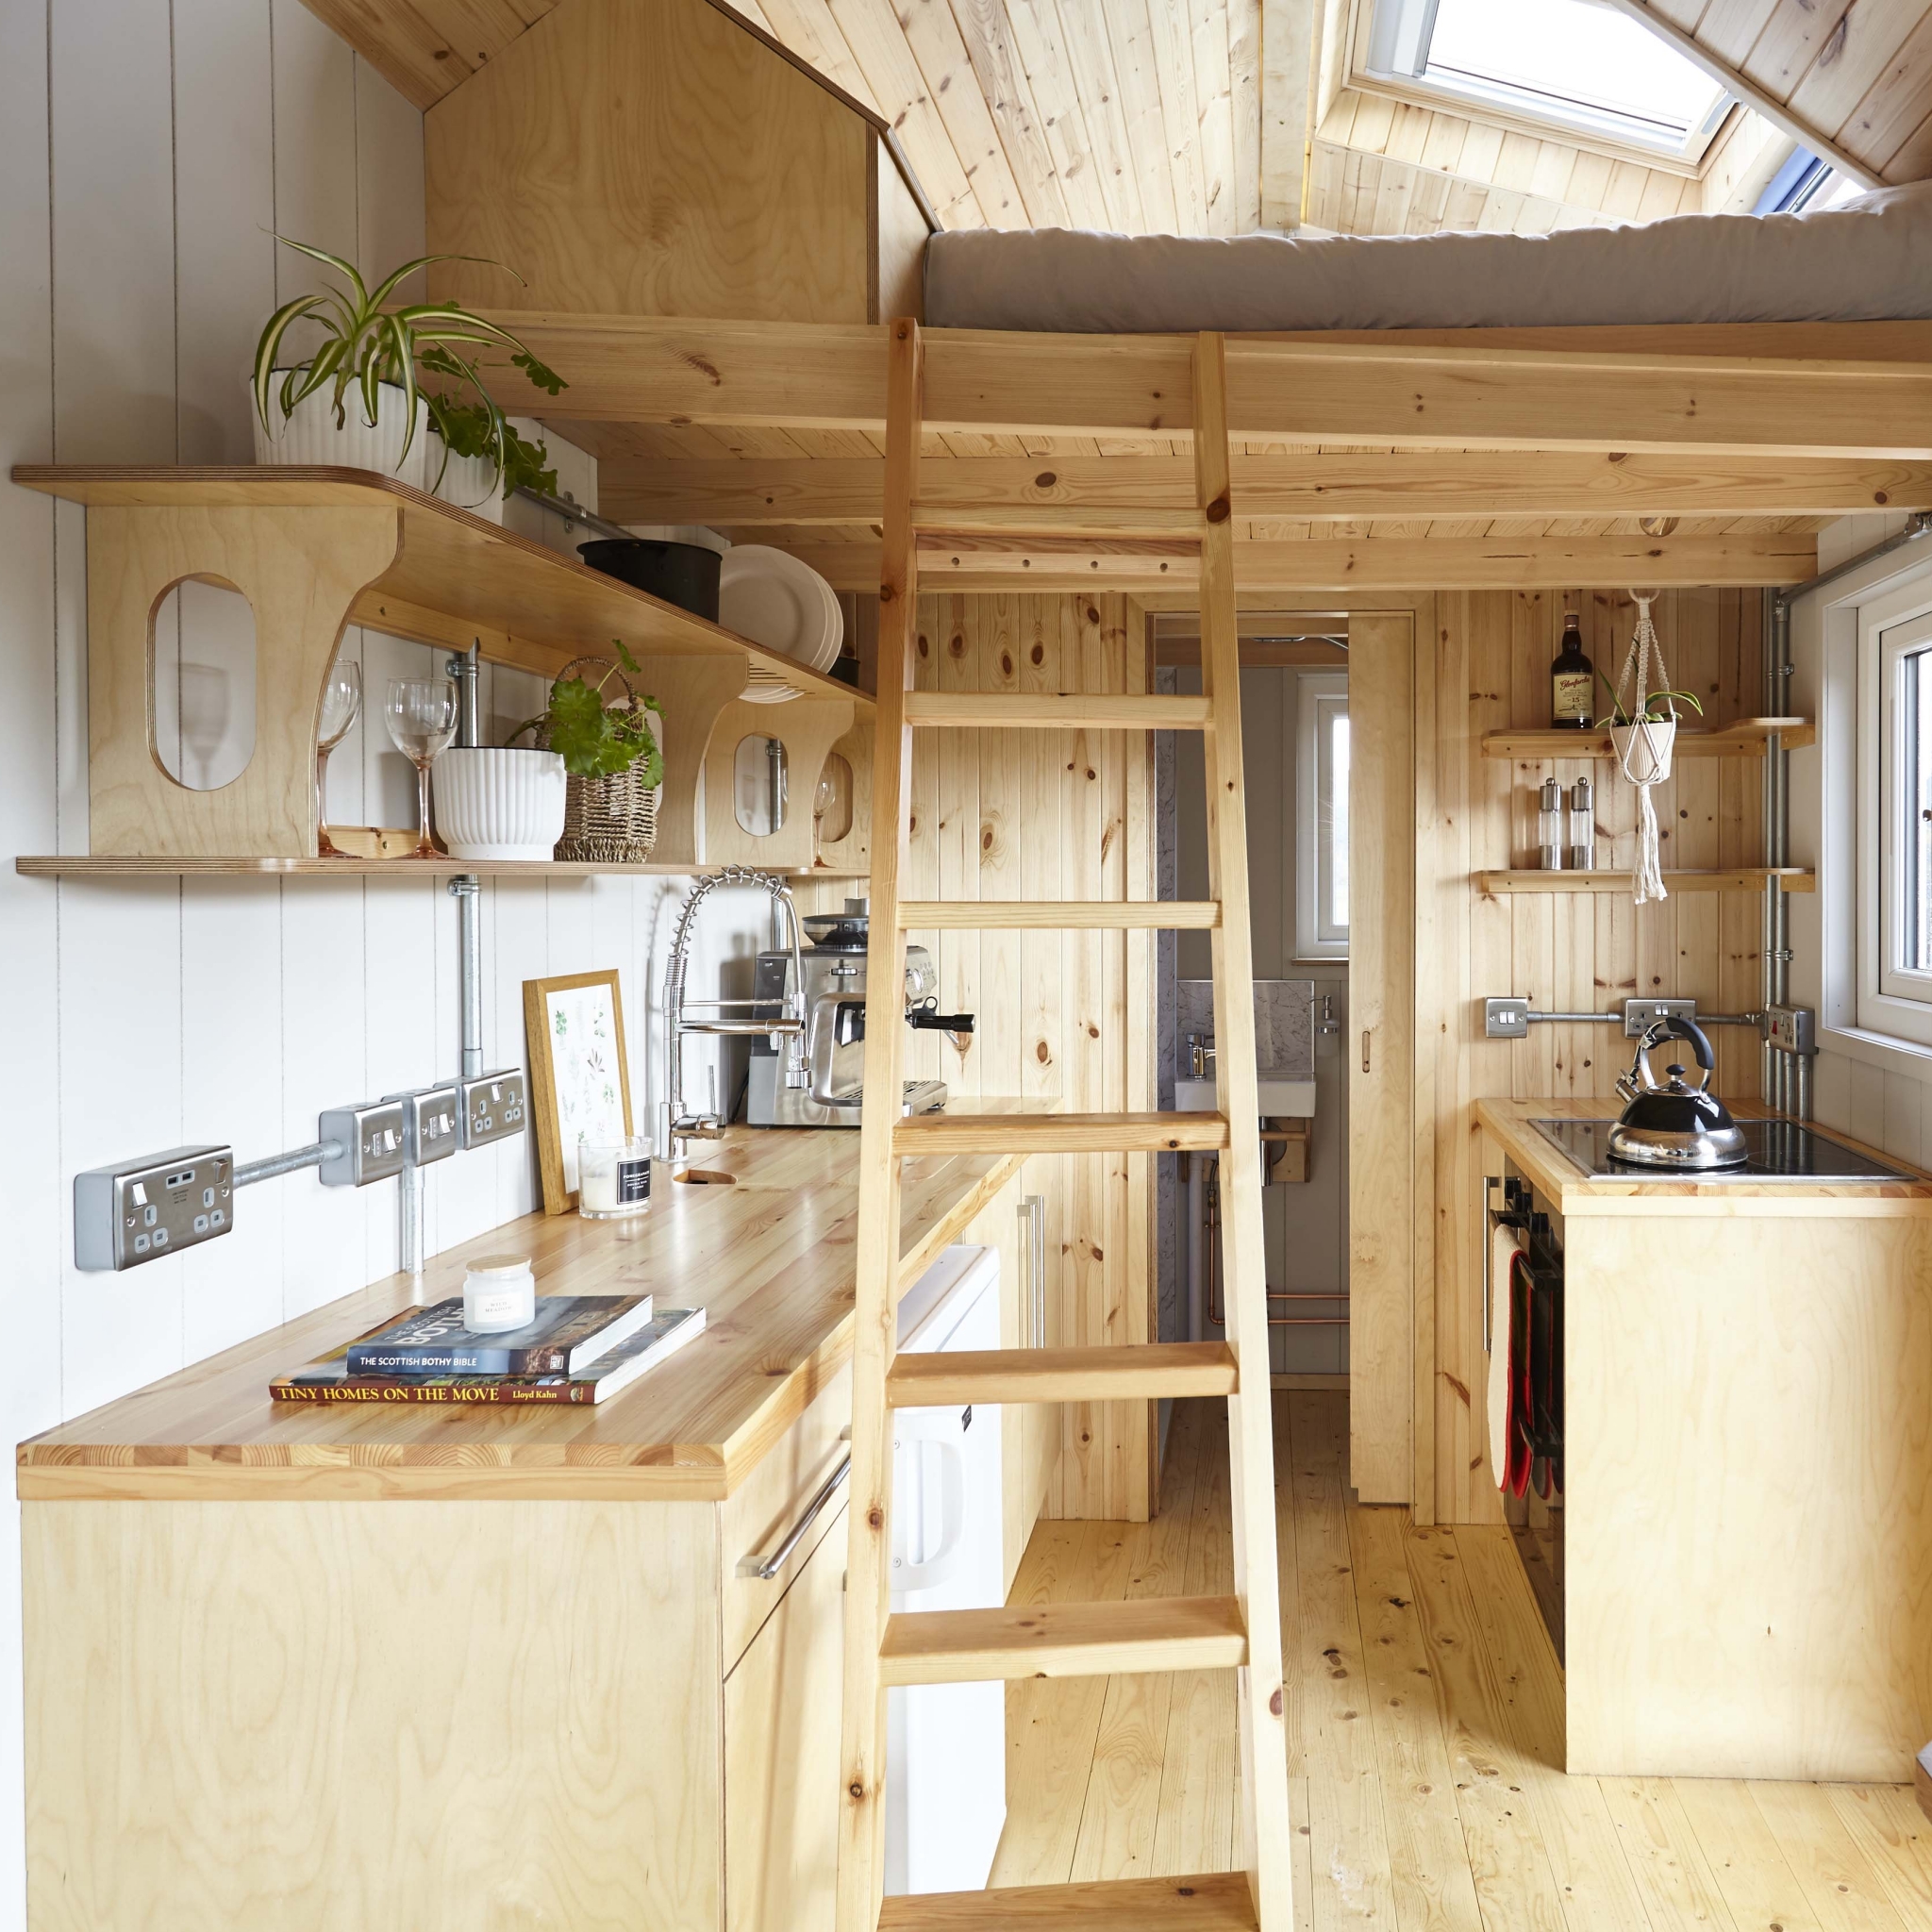  Ecological Tiny Houses builders